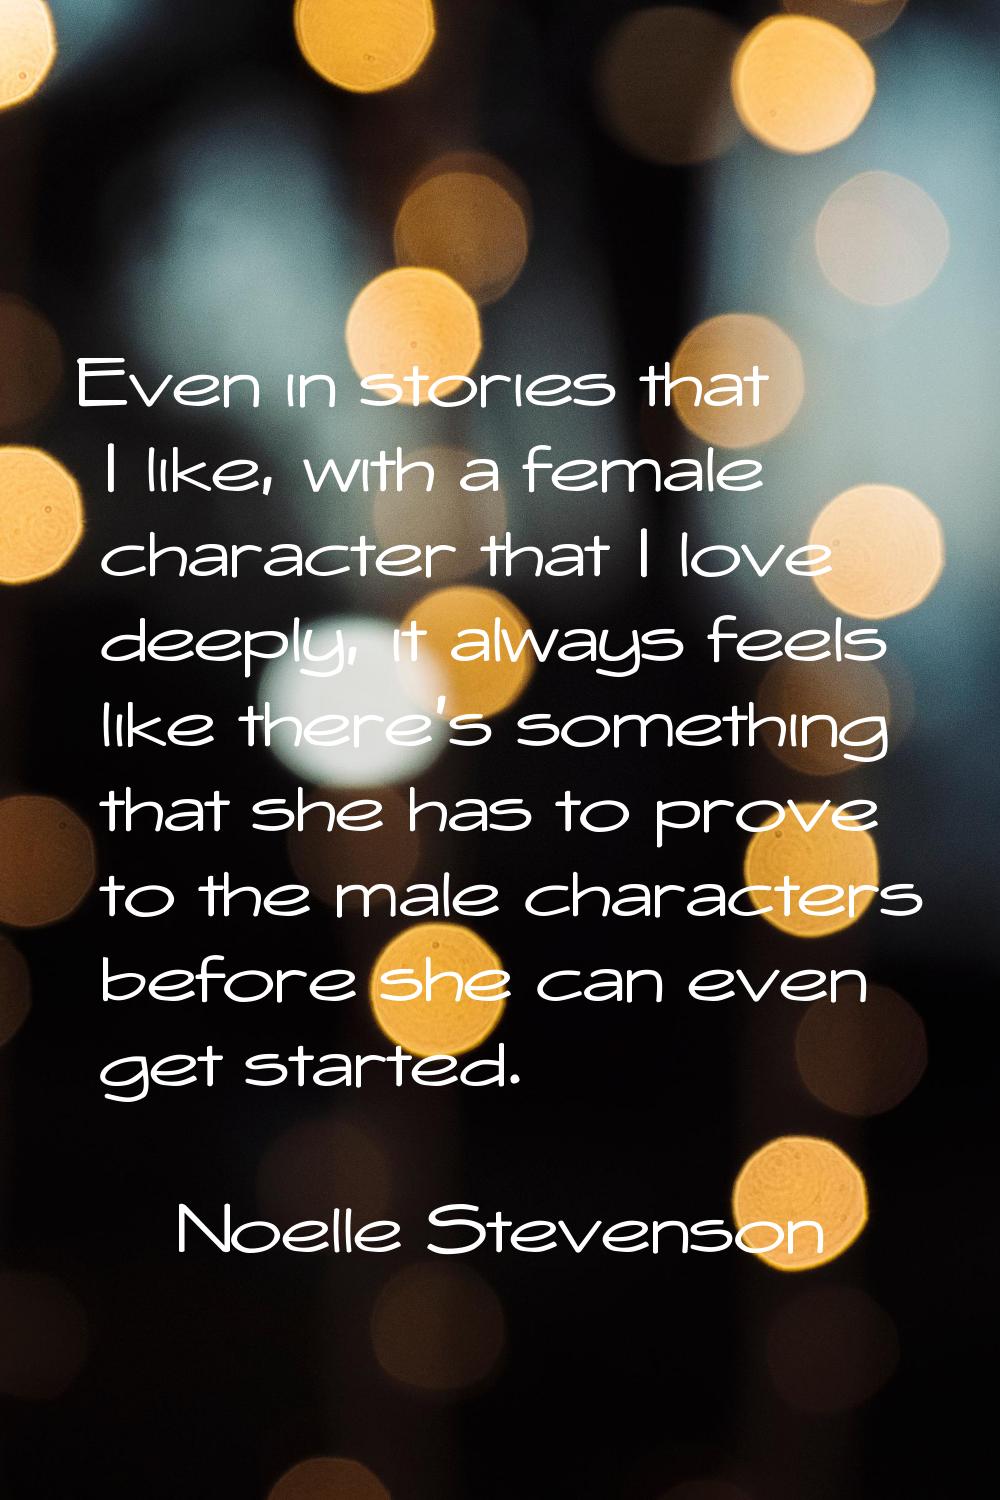 Even in stories that I like, with a female character that I love deeply, it always feels like there